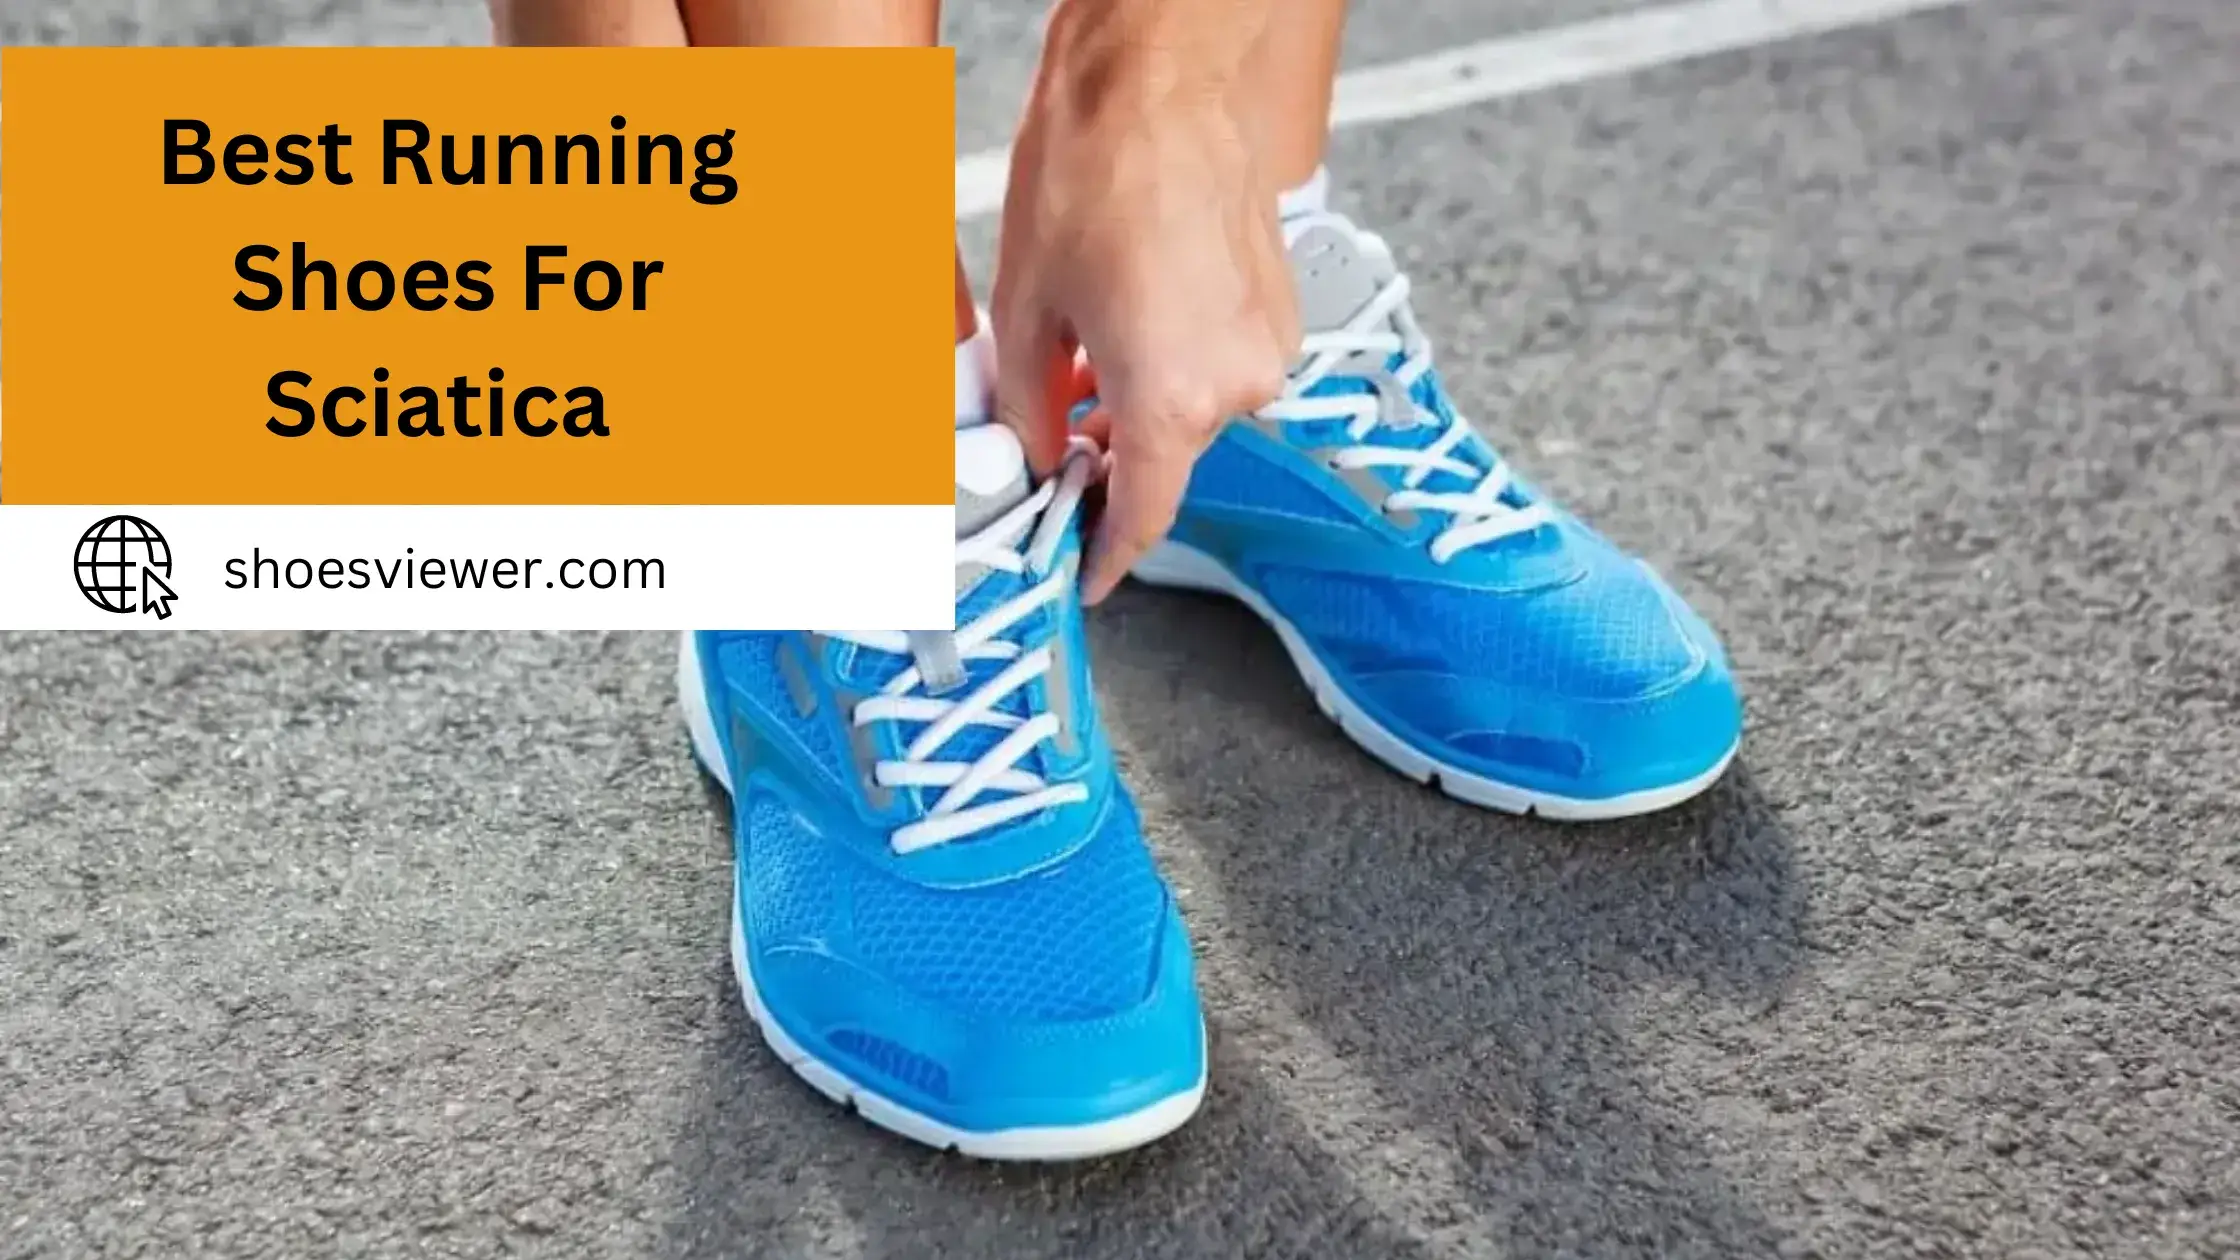 Best Running Shoes For Sciatica - A Comprehensive Guide